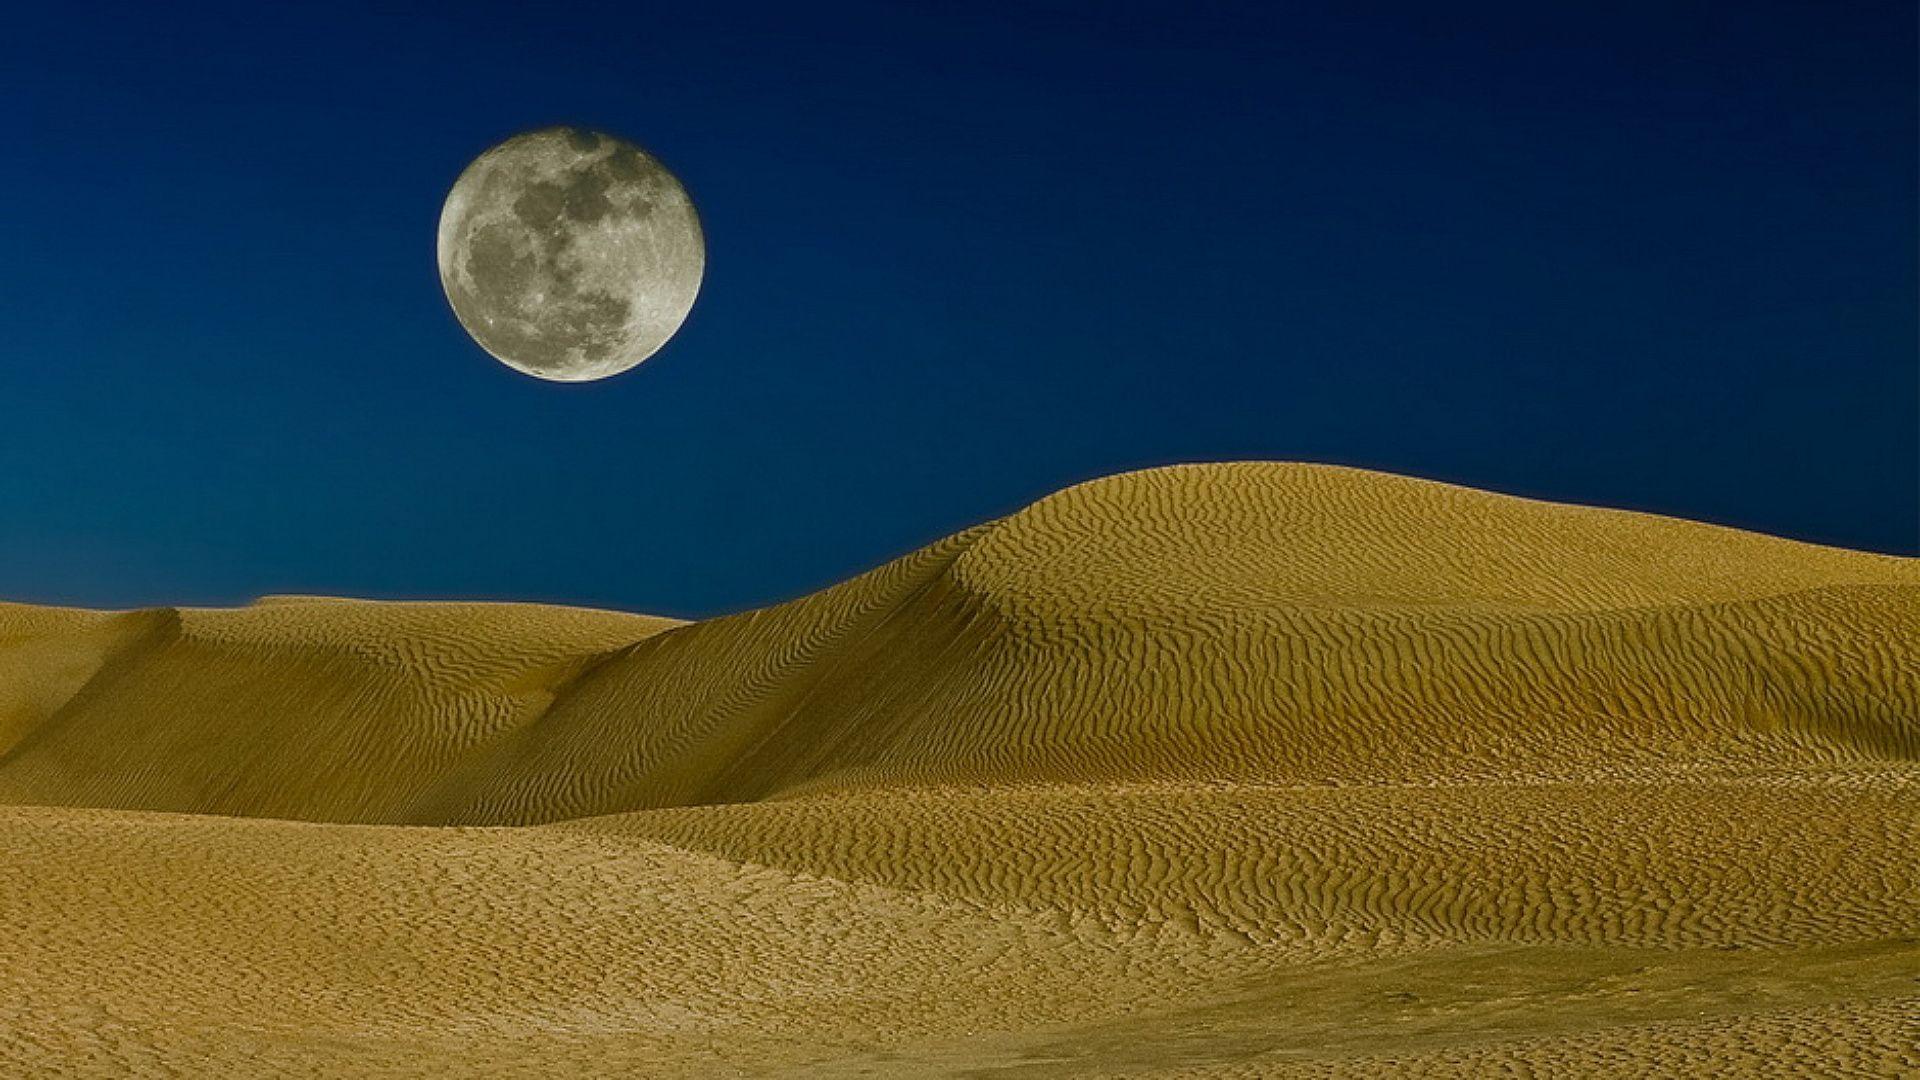 Moon over the sand dunes wallpaper and image